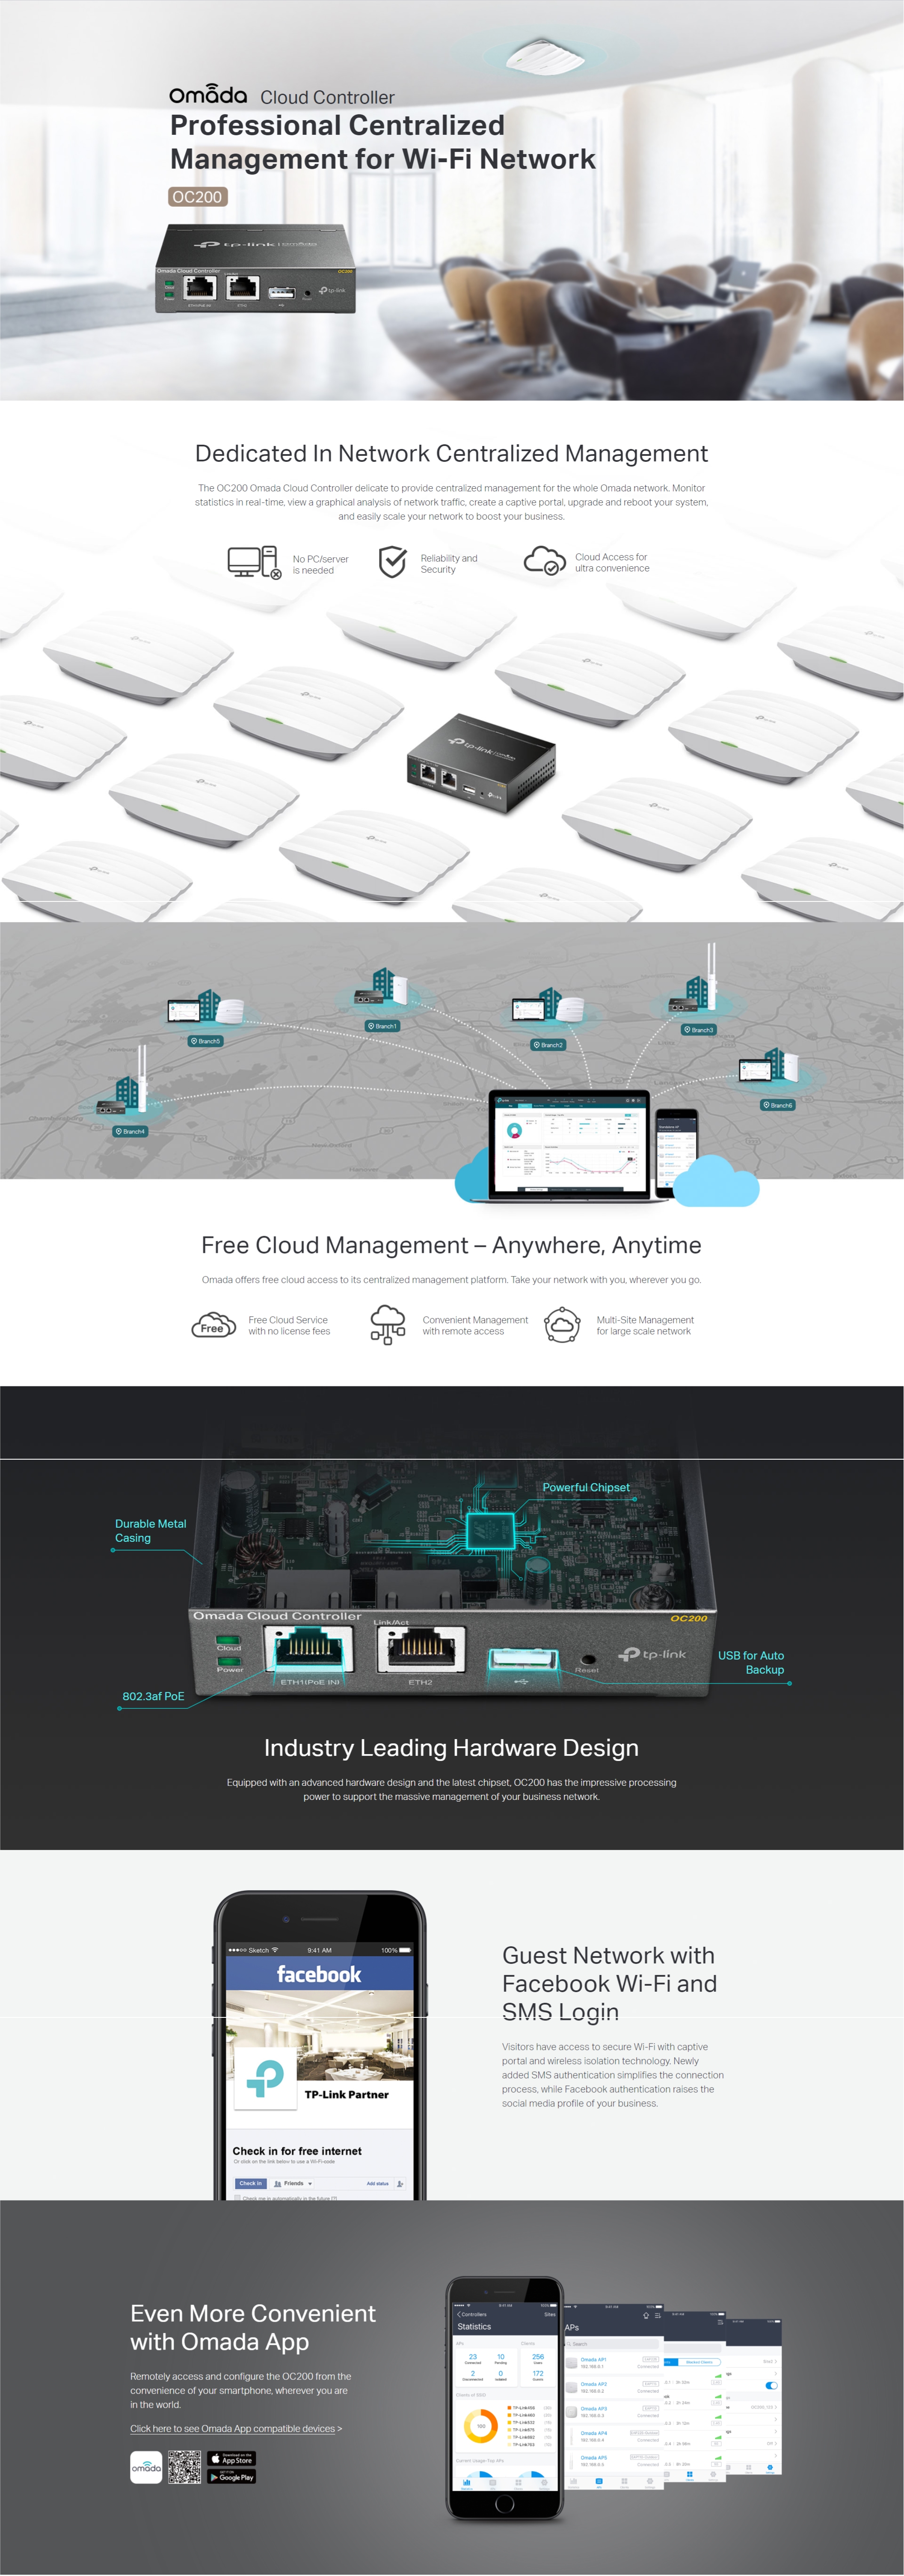 A large marketing image providing additional information about the product TP-Link Omada OC200  - Hardware Controller - Additional alt info not provided